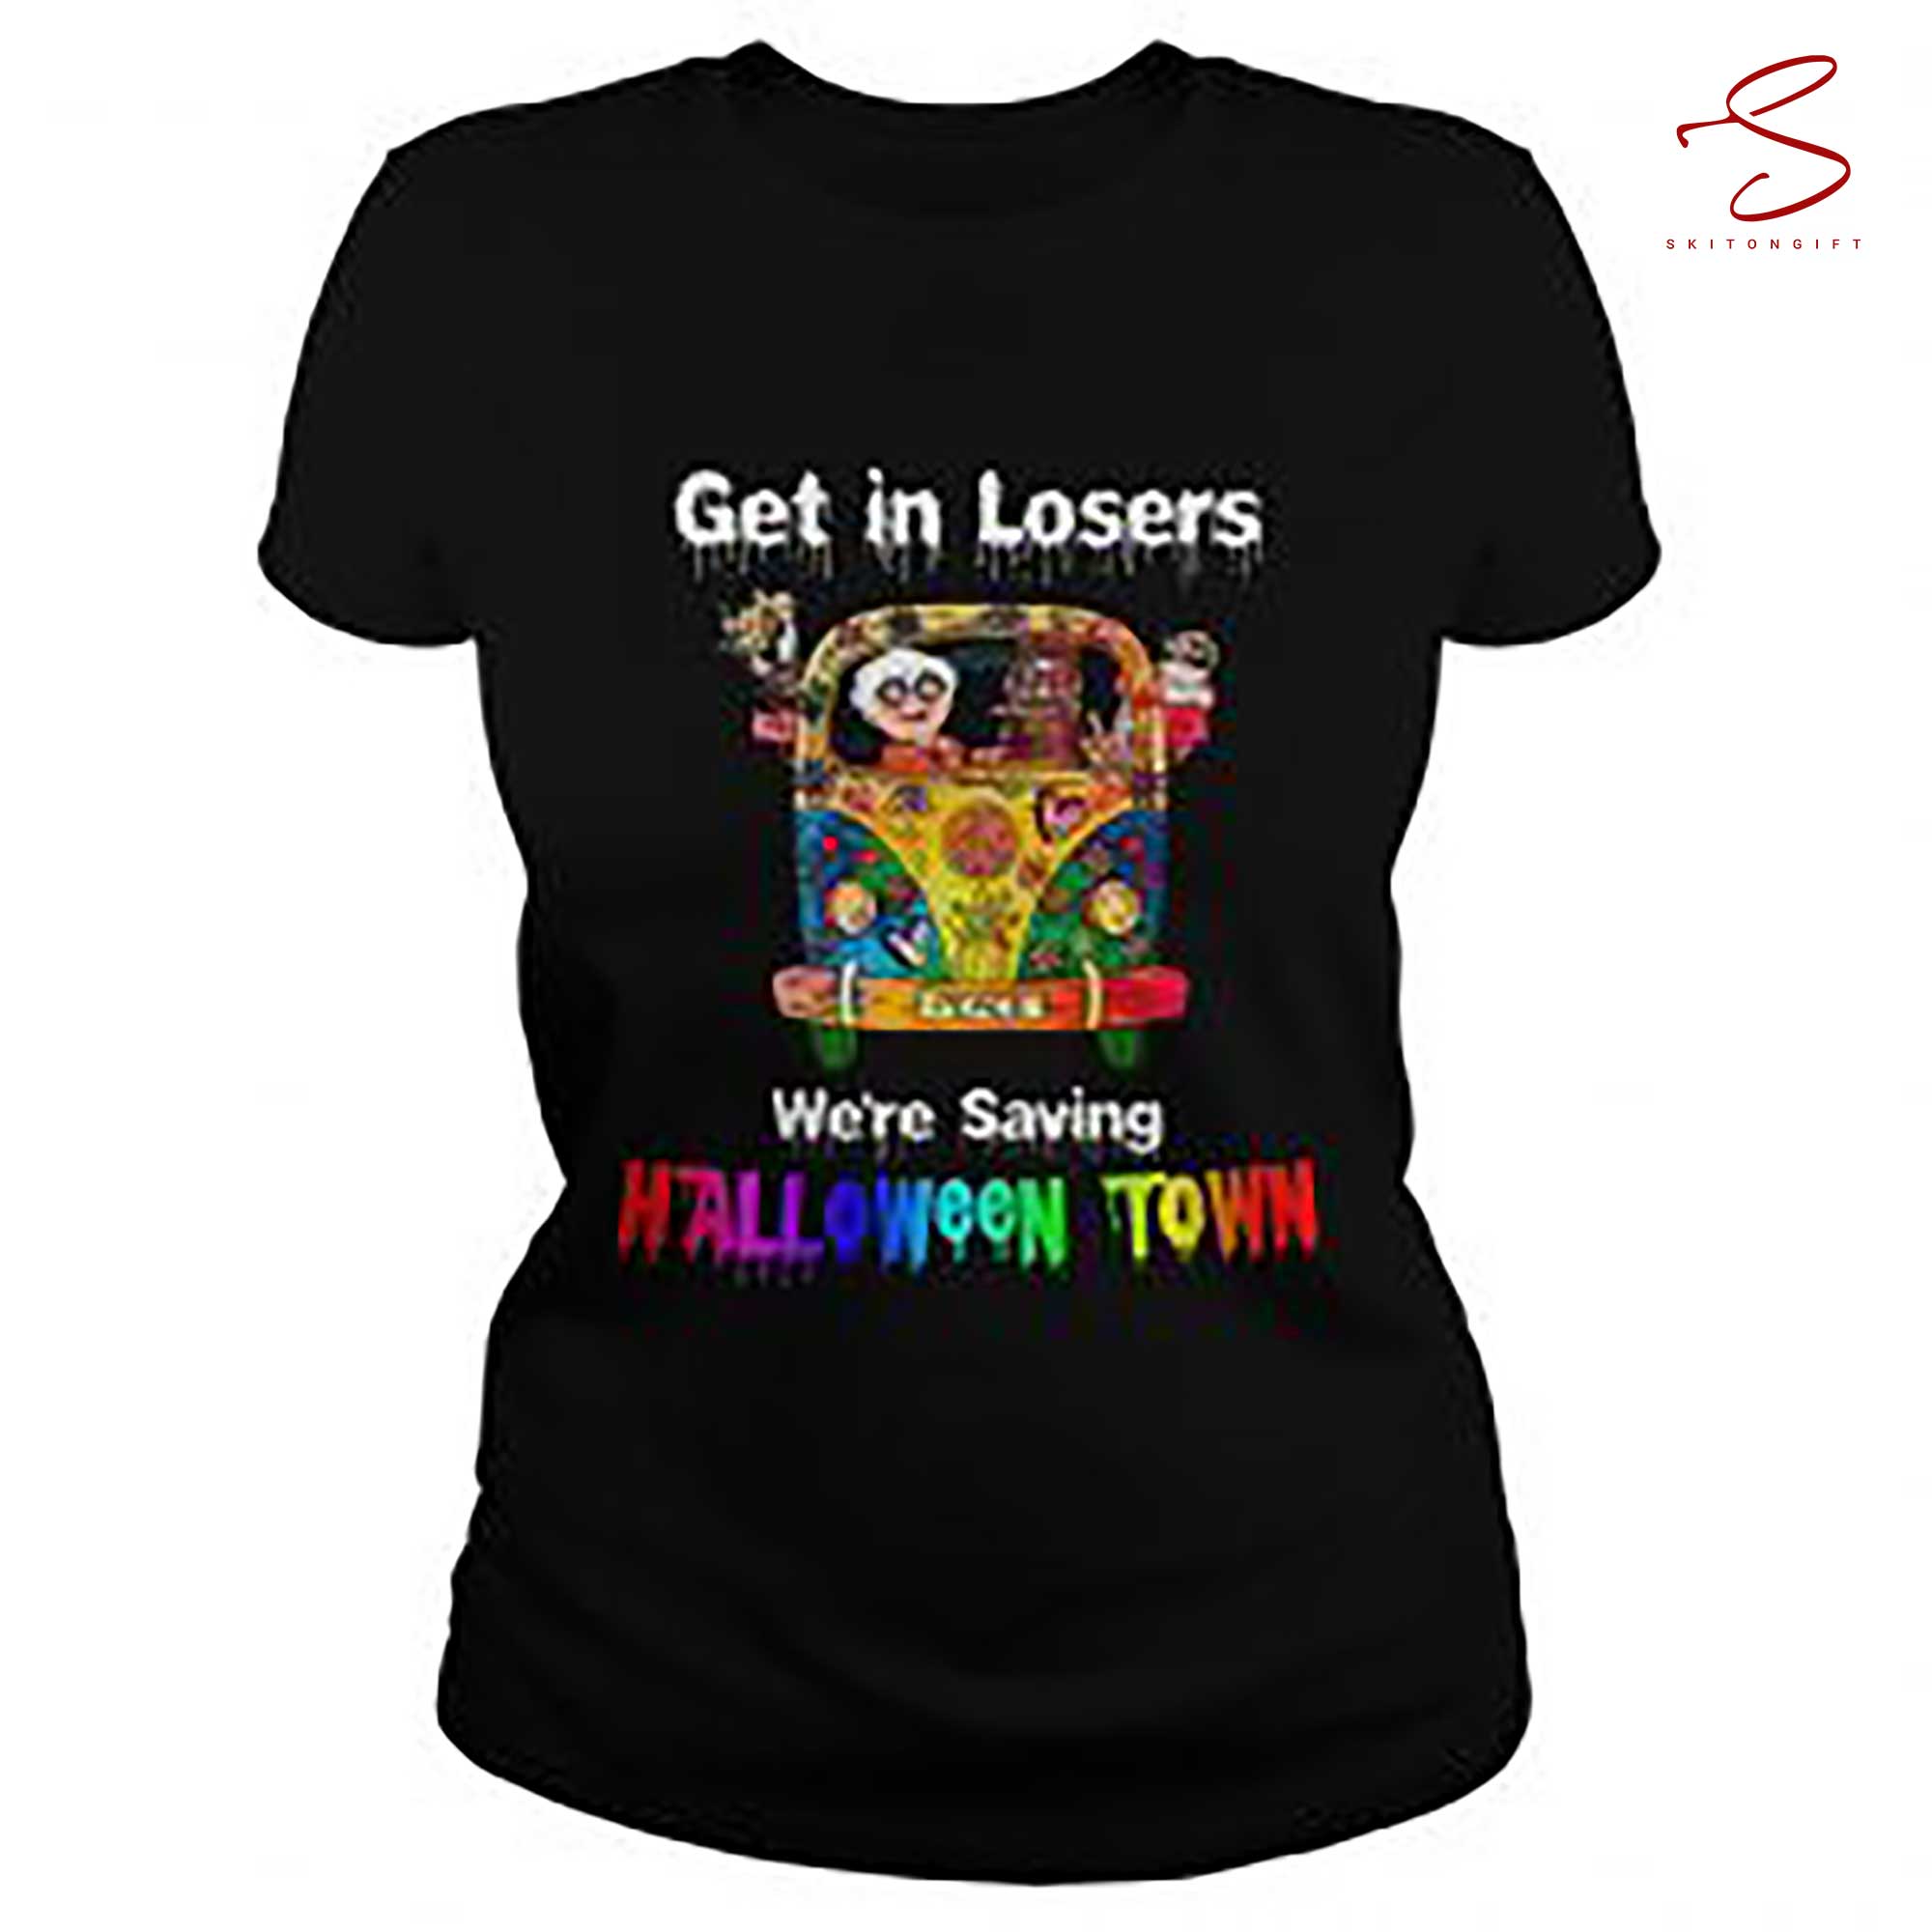 Skitongift Get In Losers Were Saving Halloween Town Car Hippie T Shirt